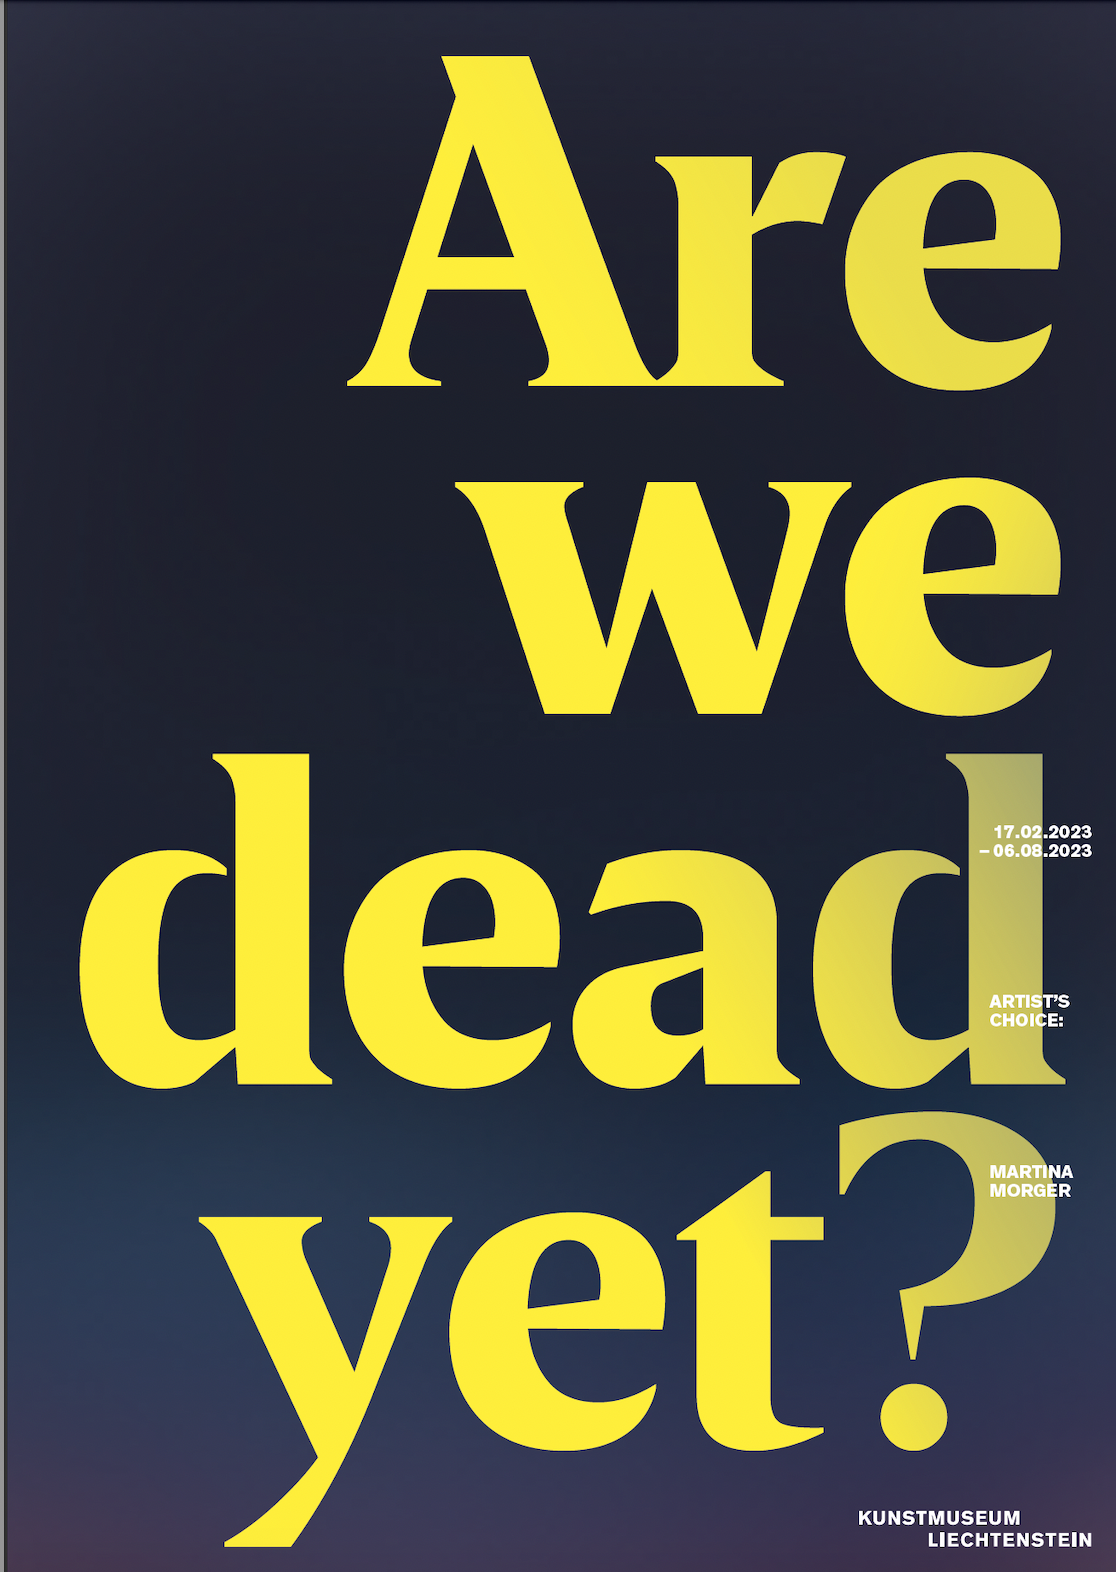 Martina Morger: Are we dead yet?